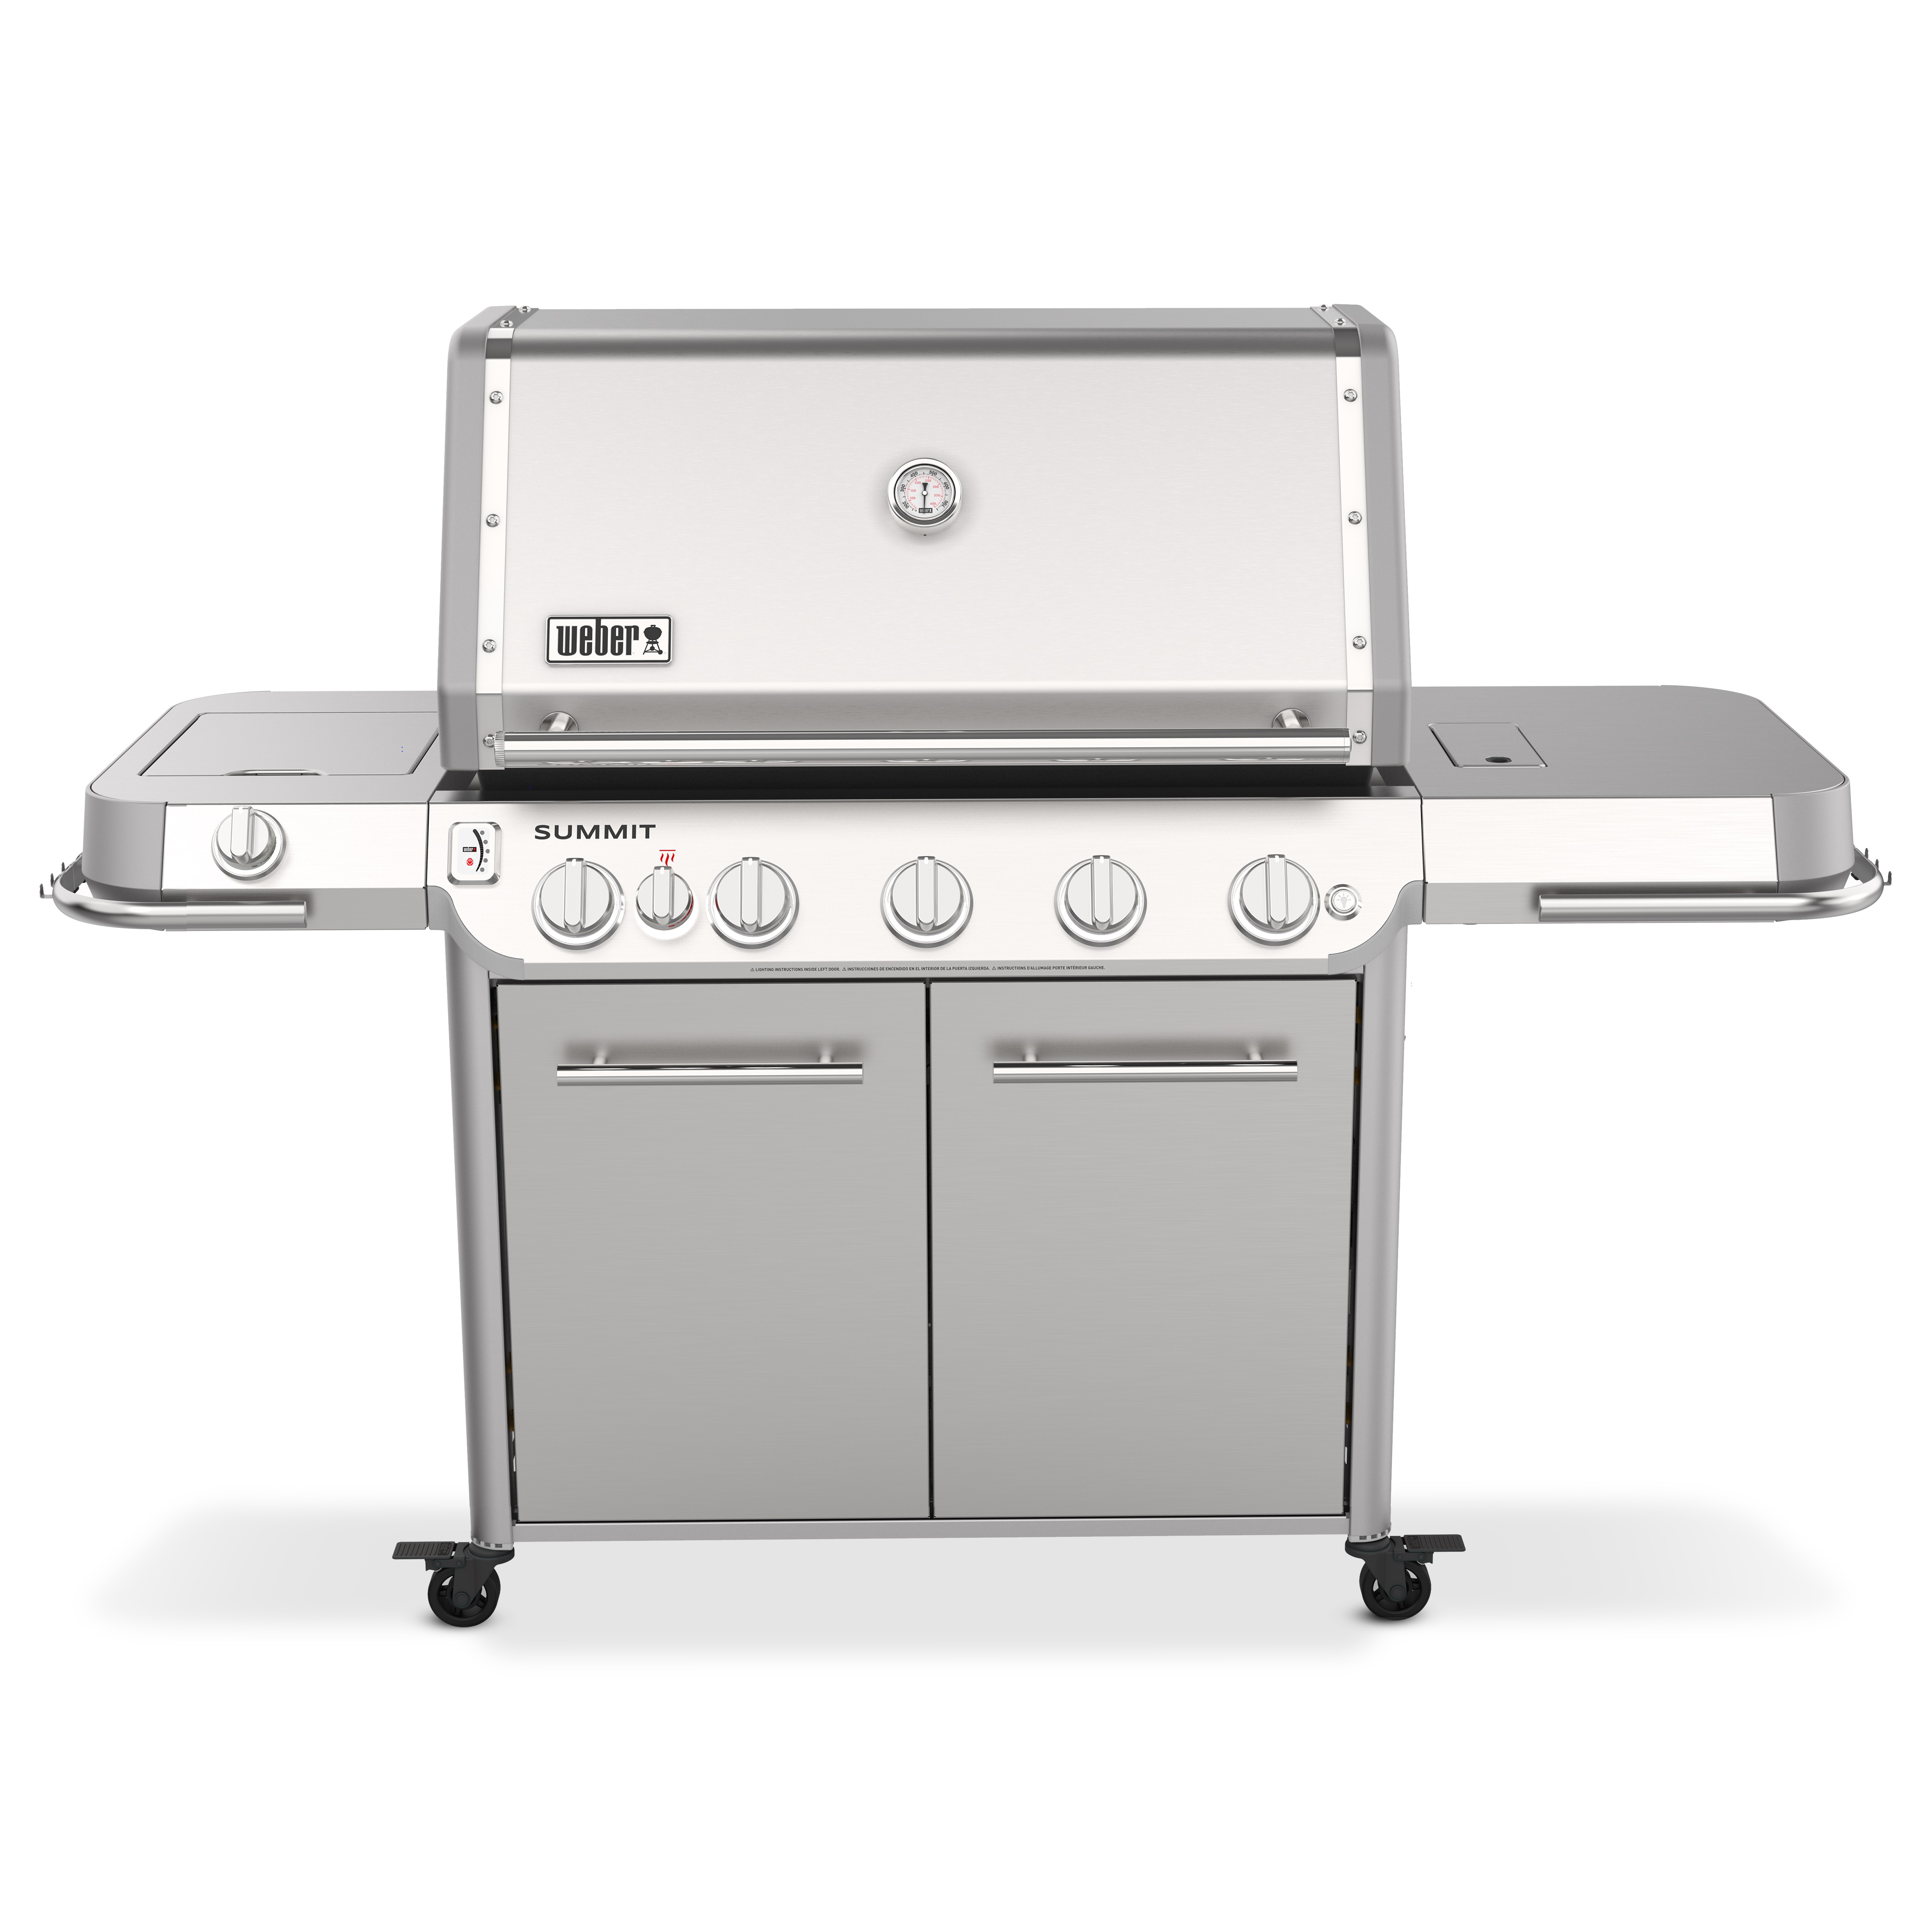 summit fs38 stainless steel grill – liquid propane product image